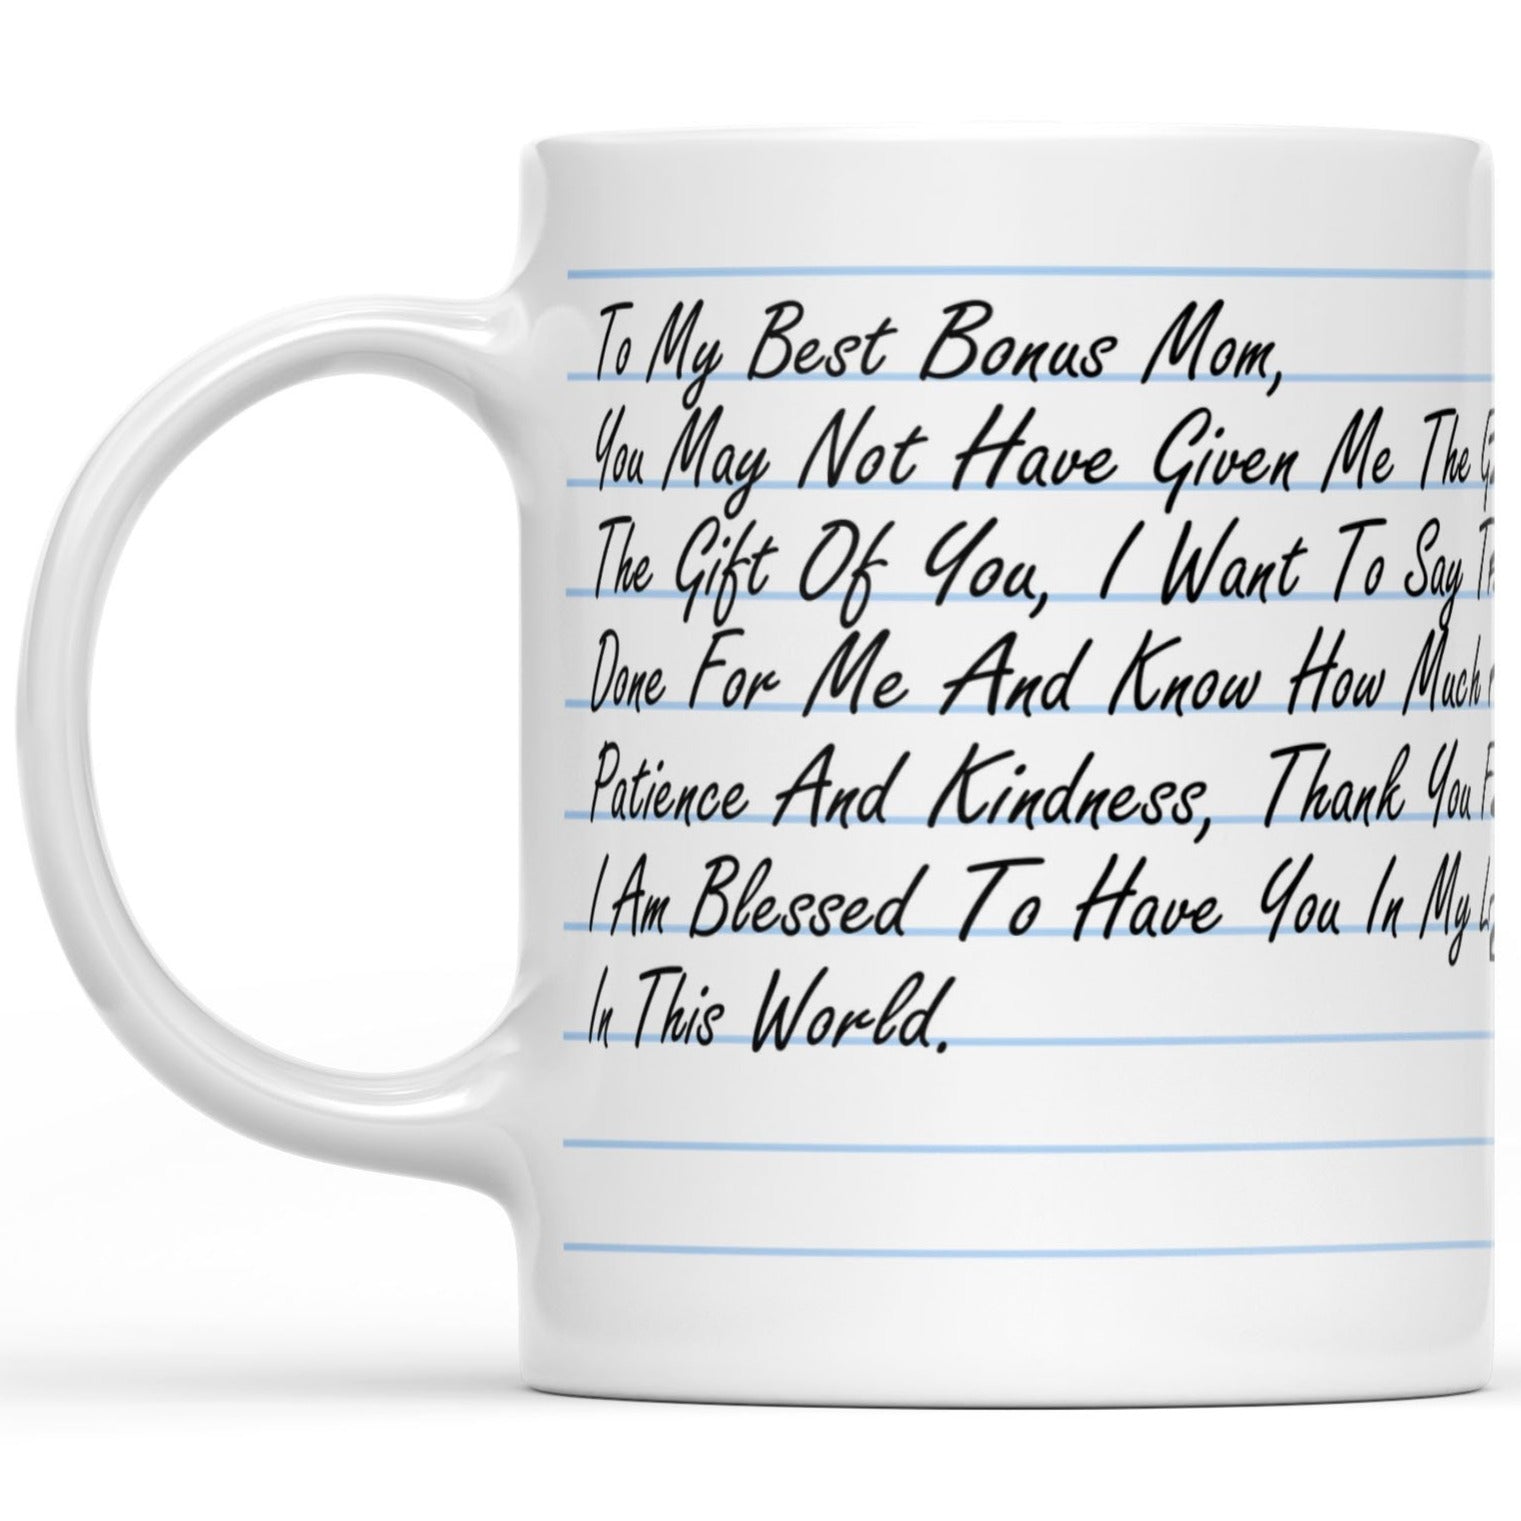 Personalized Letter to Bonus Mom From Son Mothers Day Mug Gift Ideas, Custom Message Mug for Step Mom